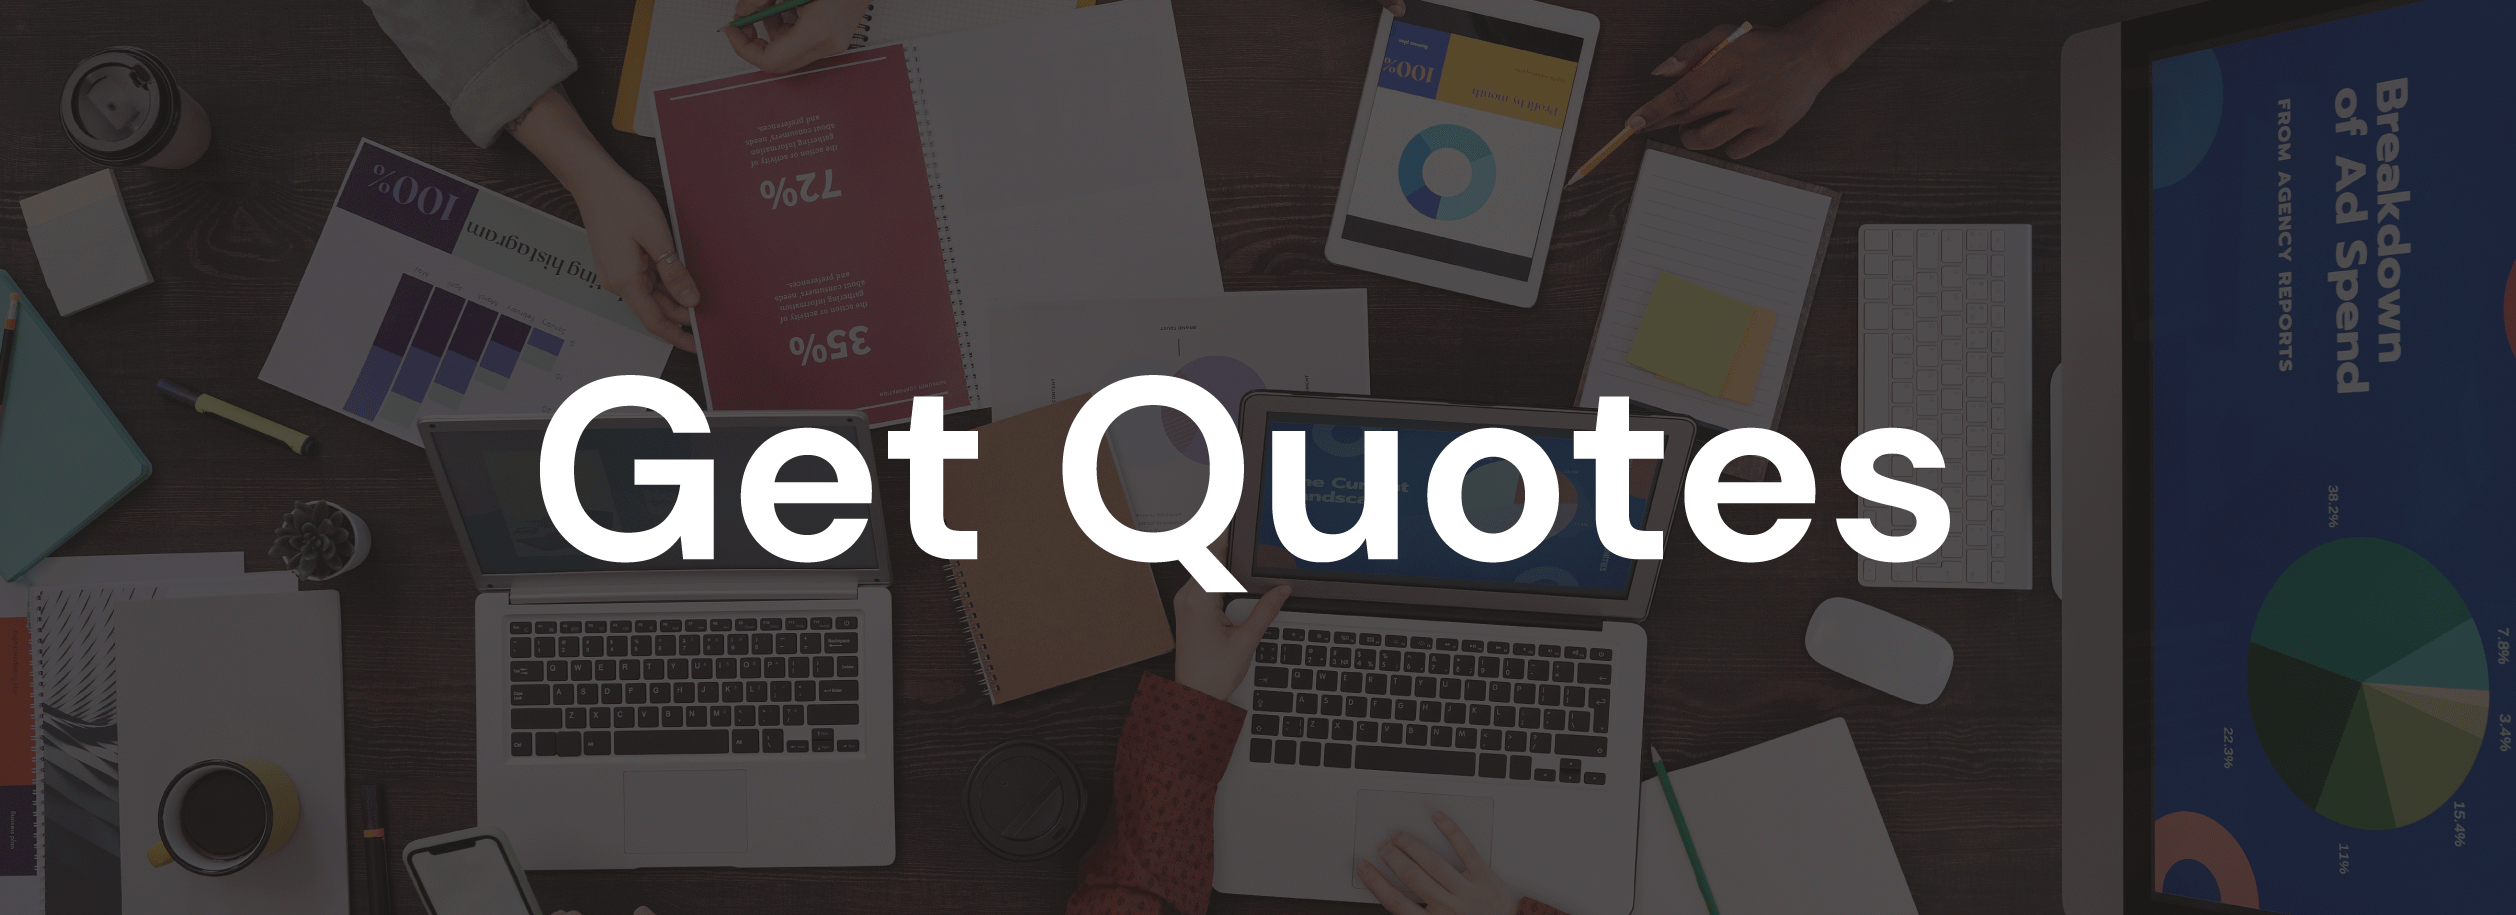 Get quote bmac infotech